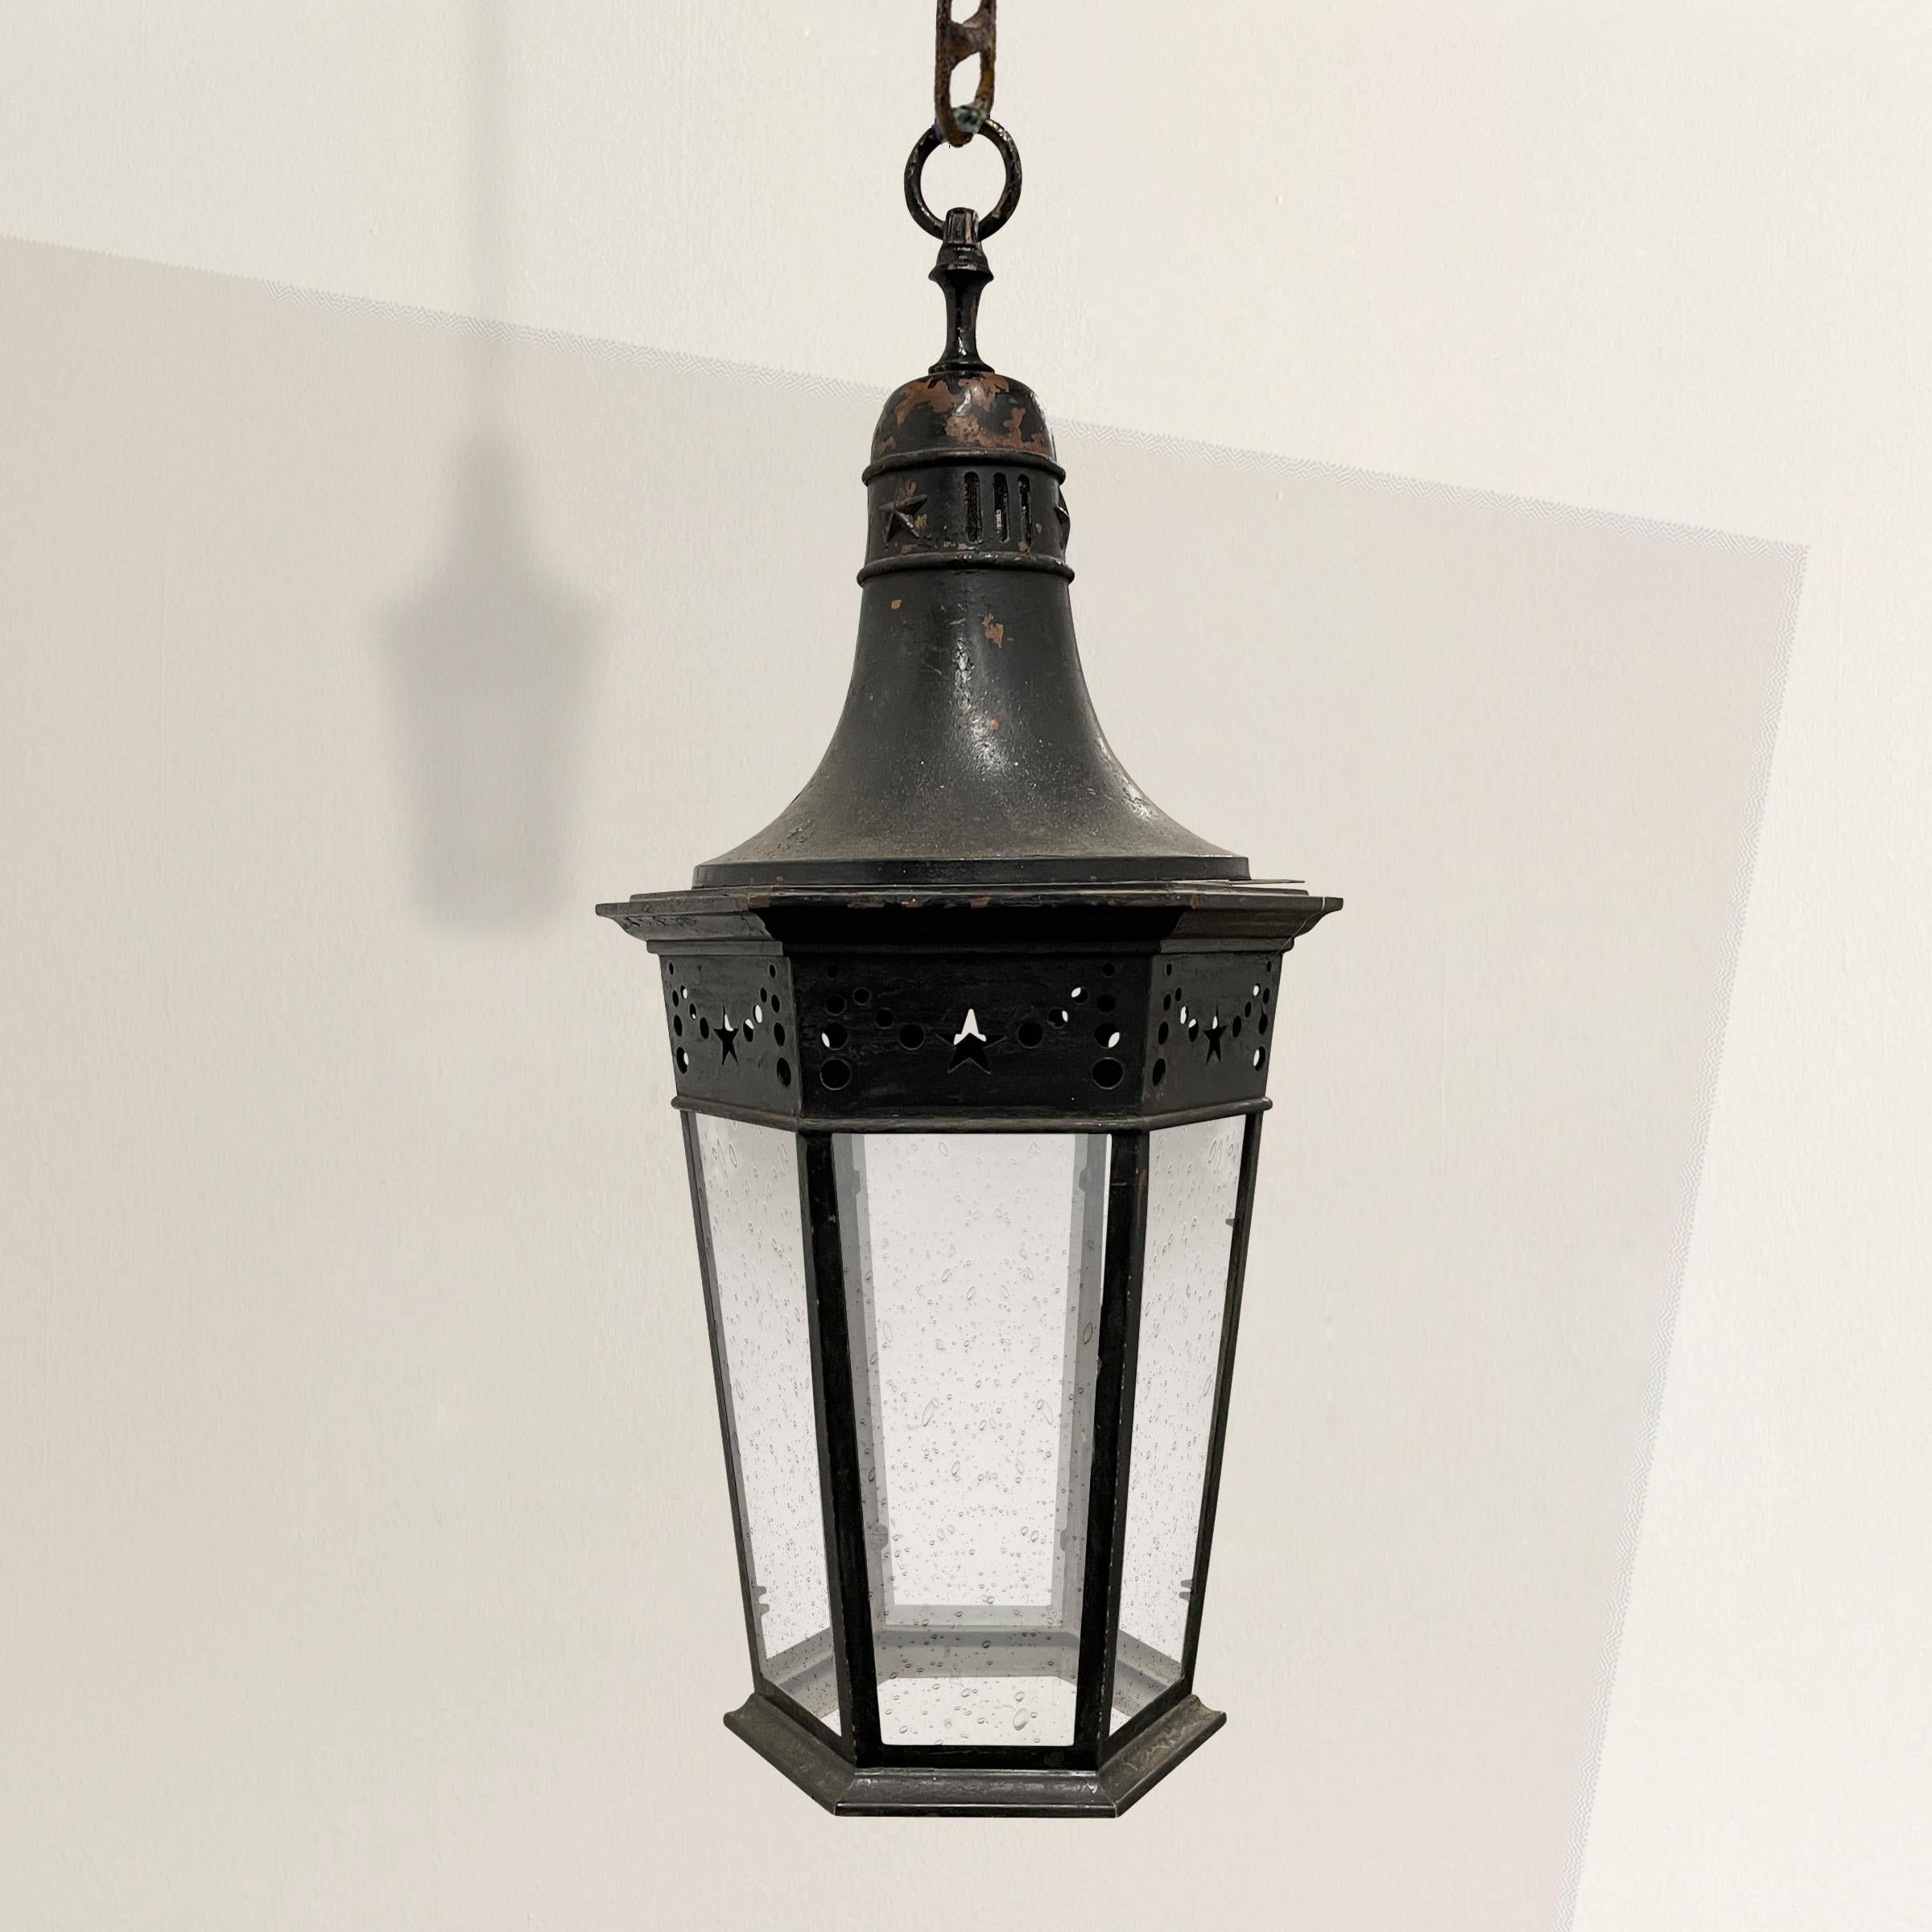 A charismatic and full-of-personality 19th century French black painted copper gas lantern, now electrified, with six tapered sides with a pierced stylized swags with stars and graduated dots on the frieze of each side, and with new seeded glass